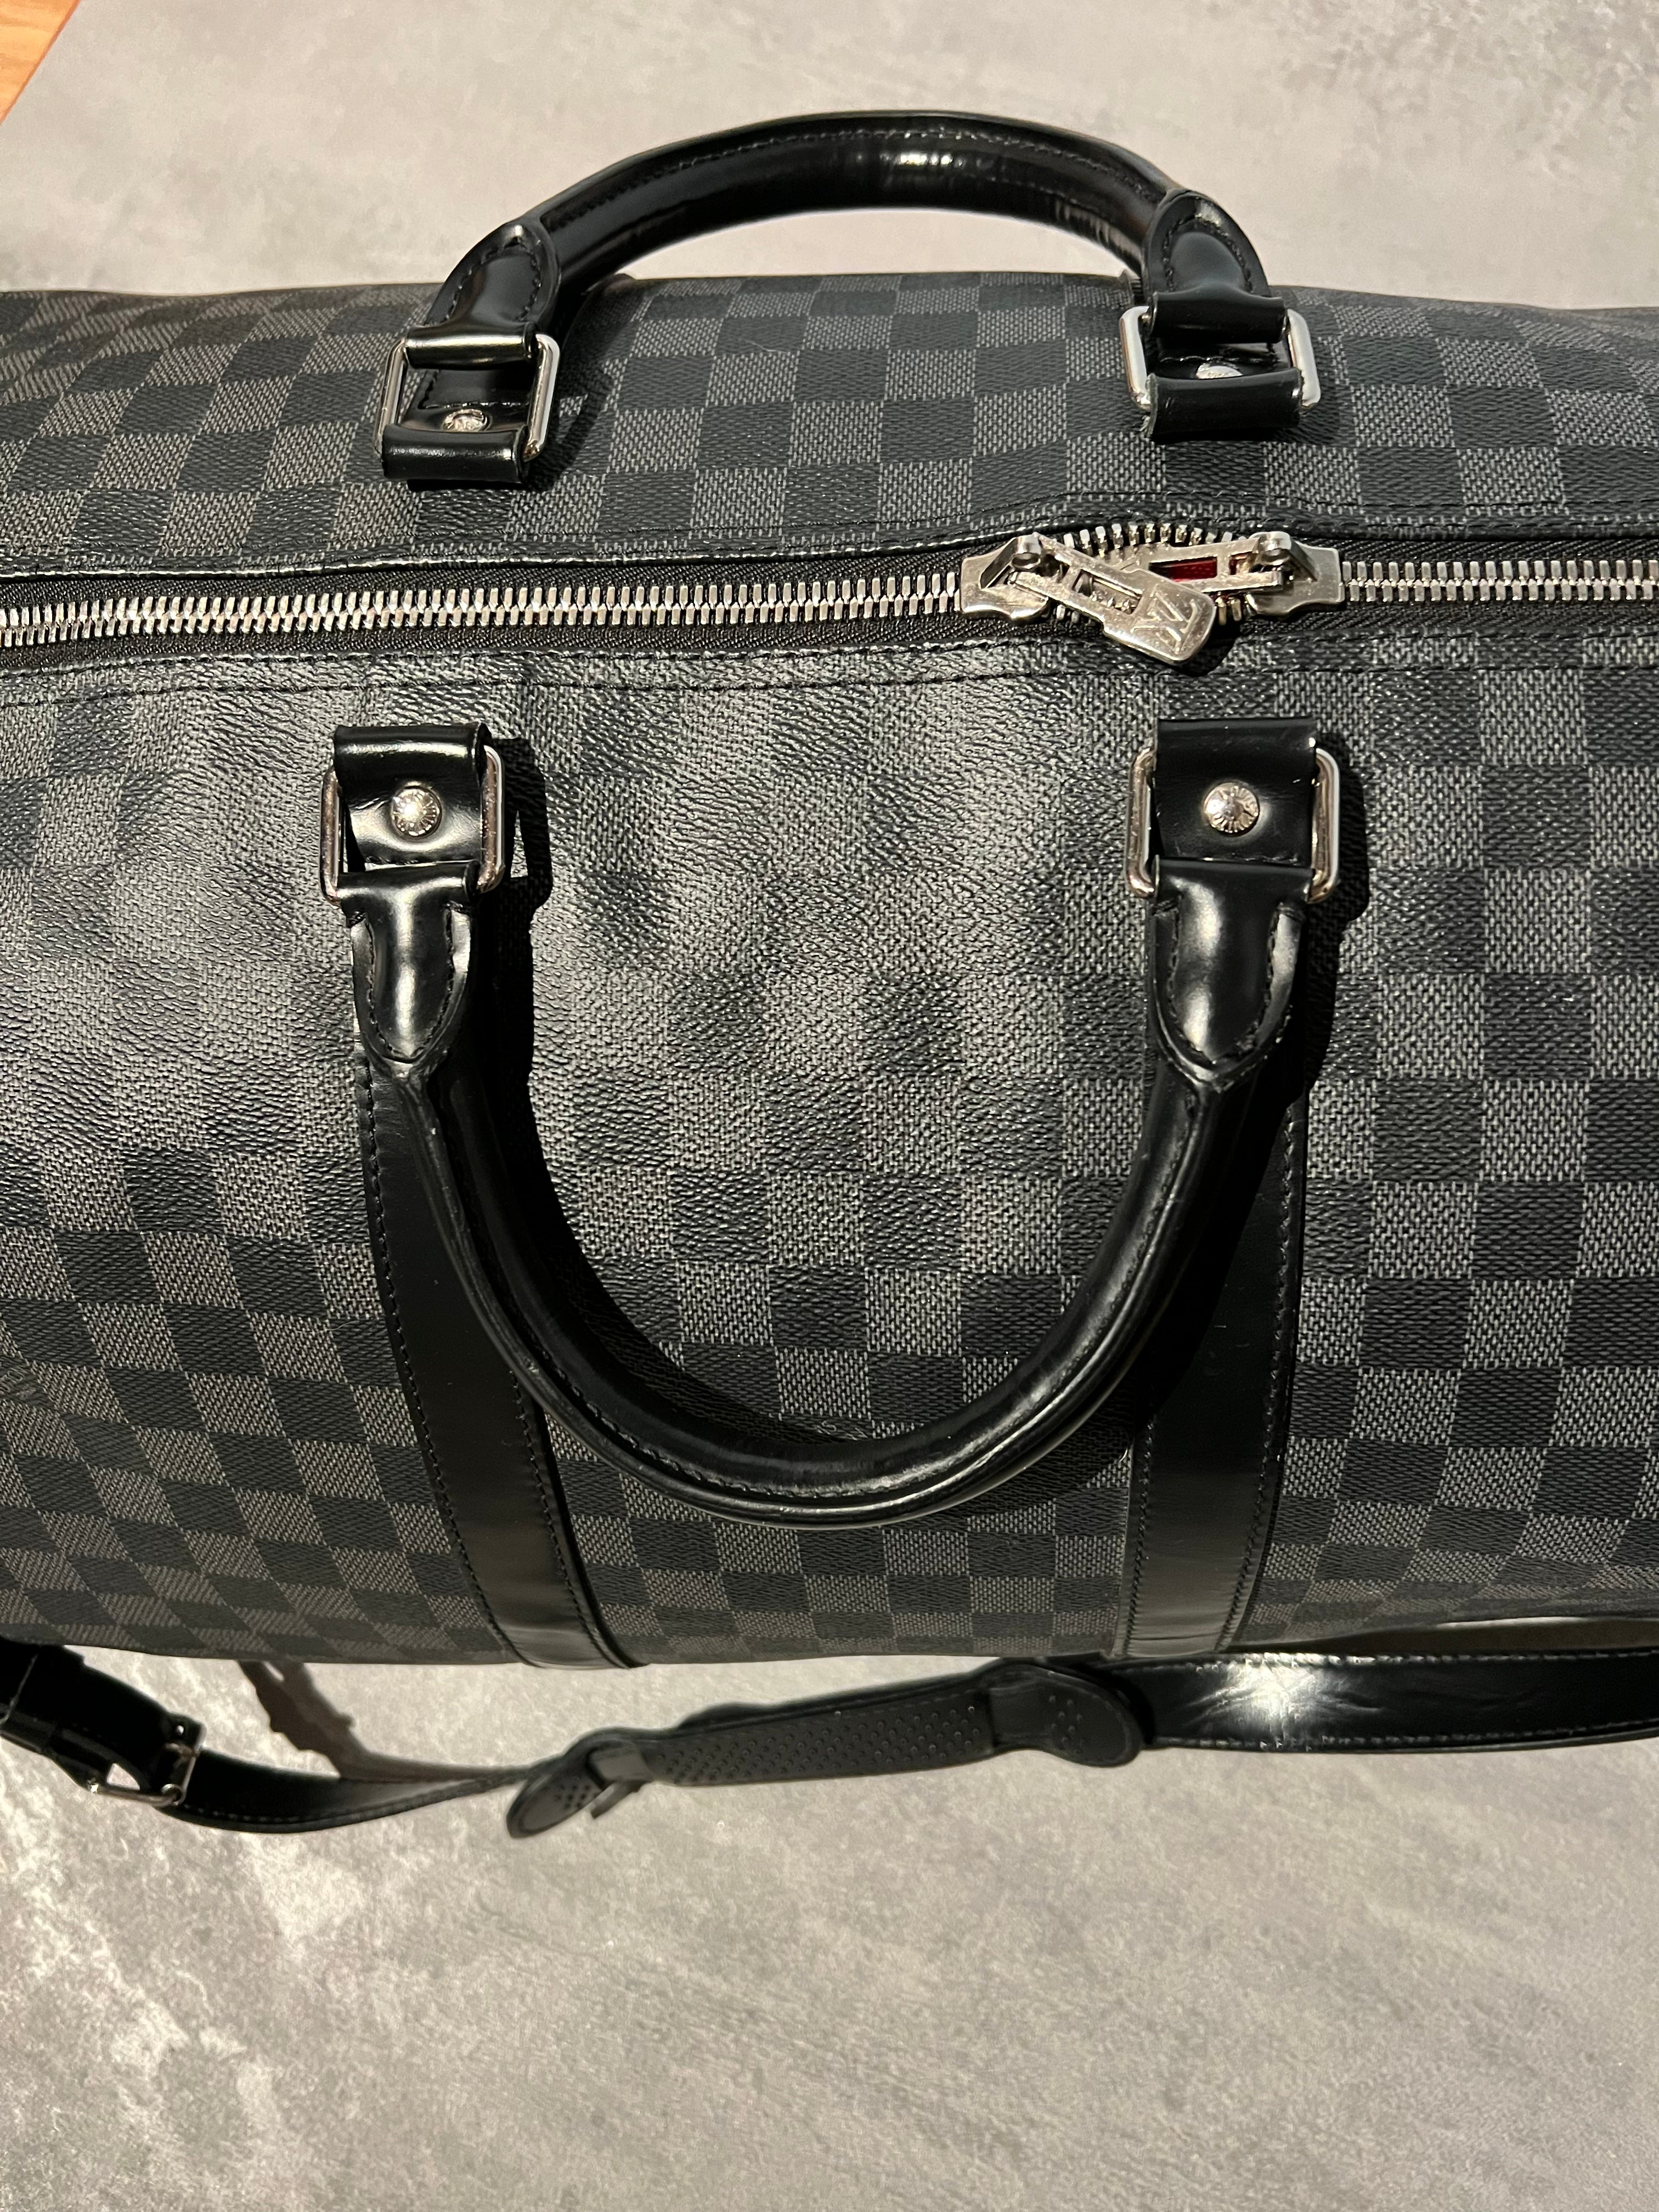 First time LV owner here. My Keepall Bandoulière 55 seems to